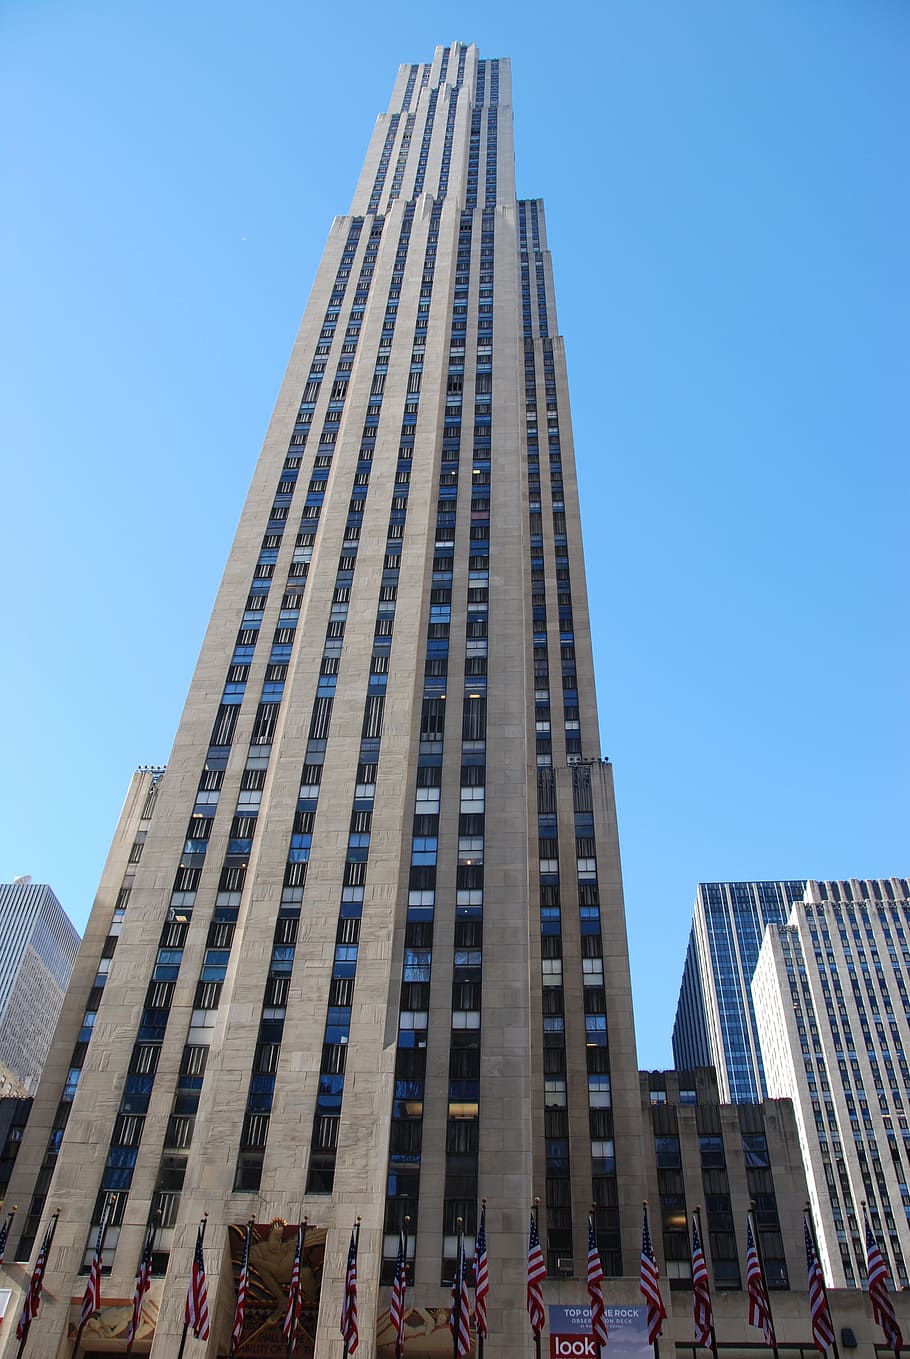 skyscraper, rockefeller, new york, sky, built structure, architecture, building exterior, city, tall - high, clear sky